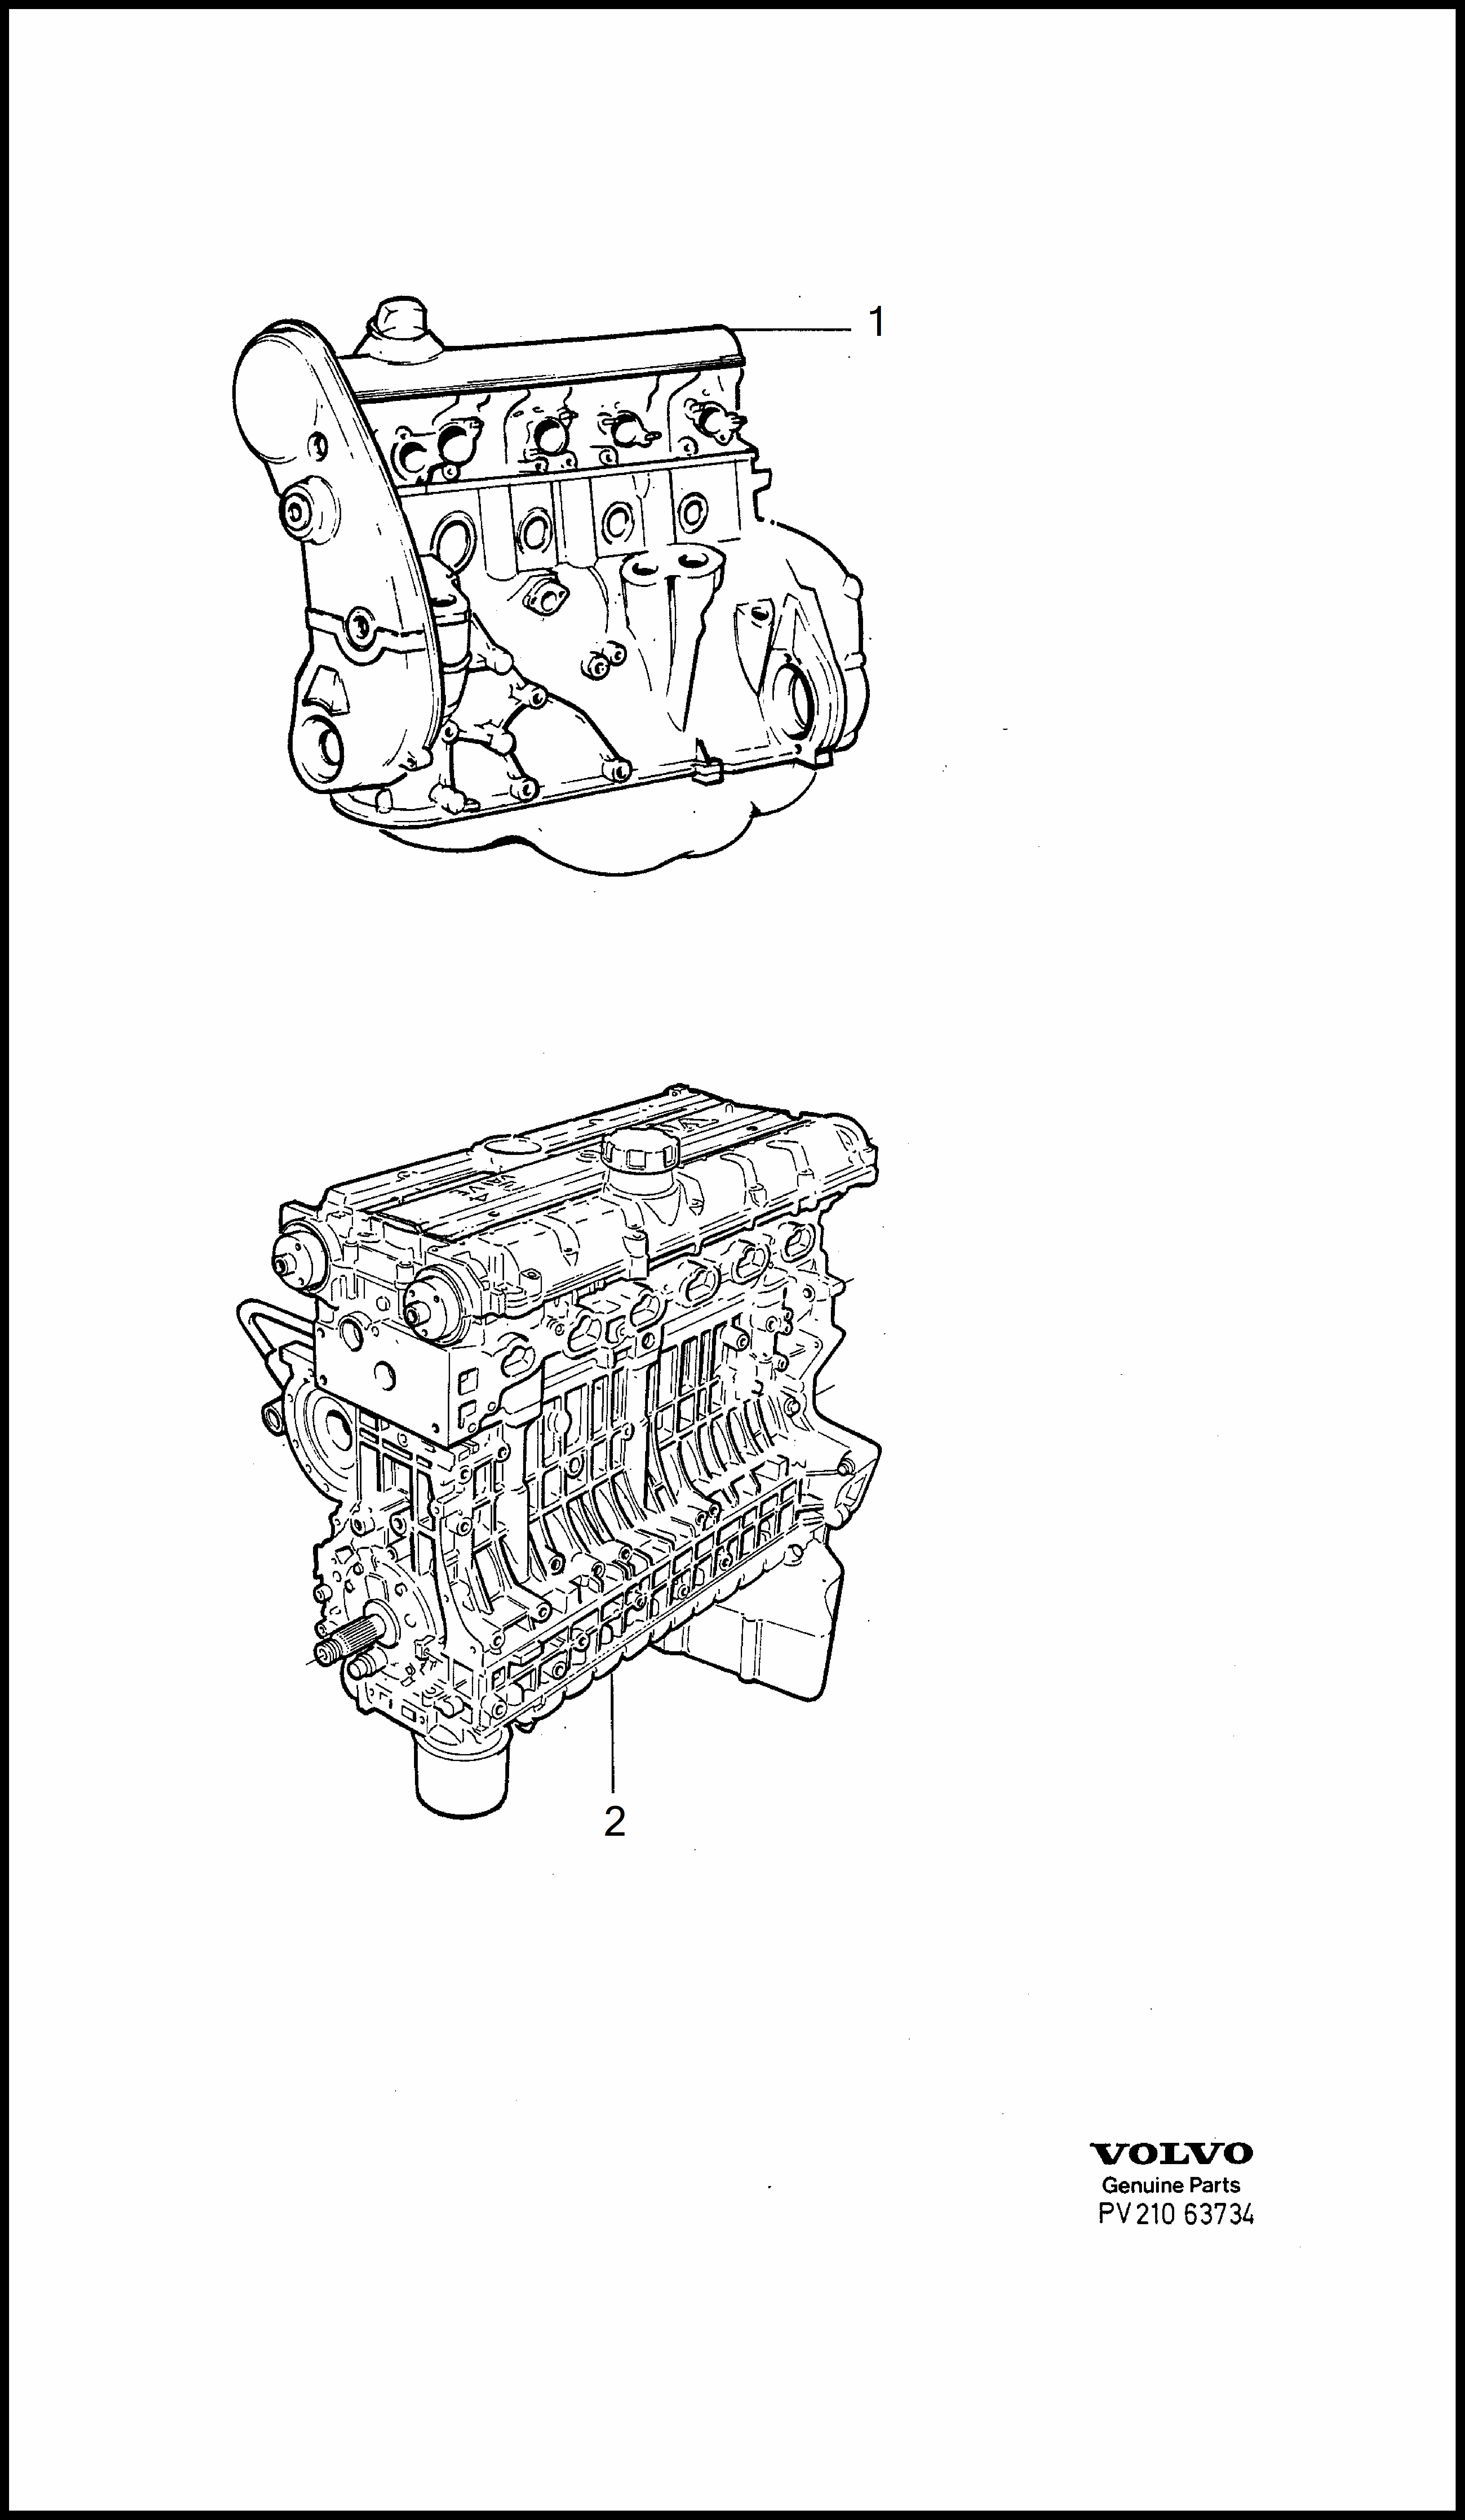 engines replacement engines for Volvo 960 960